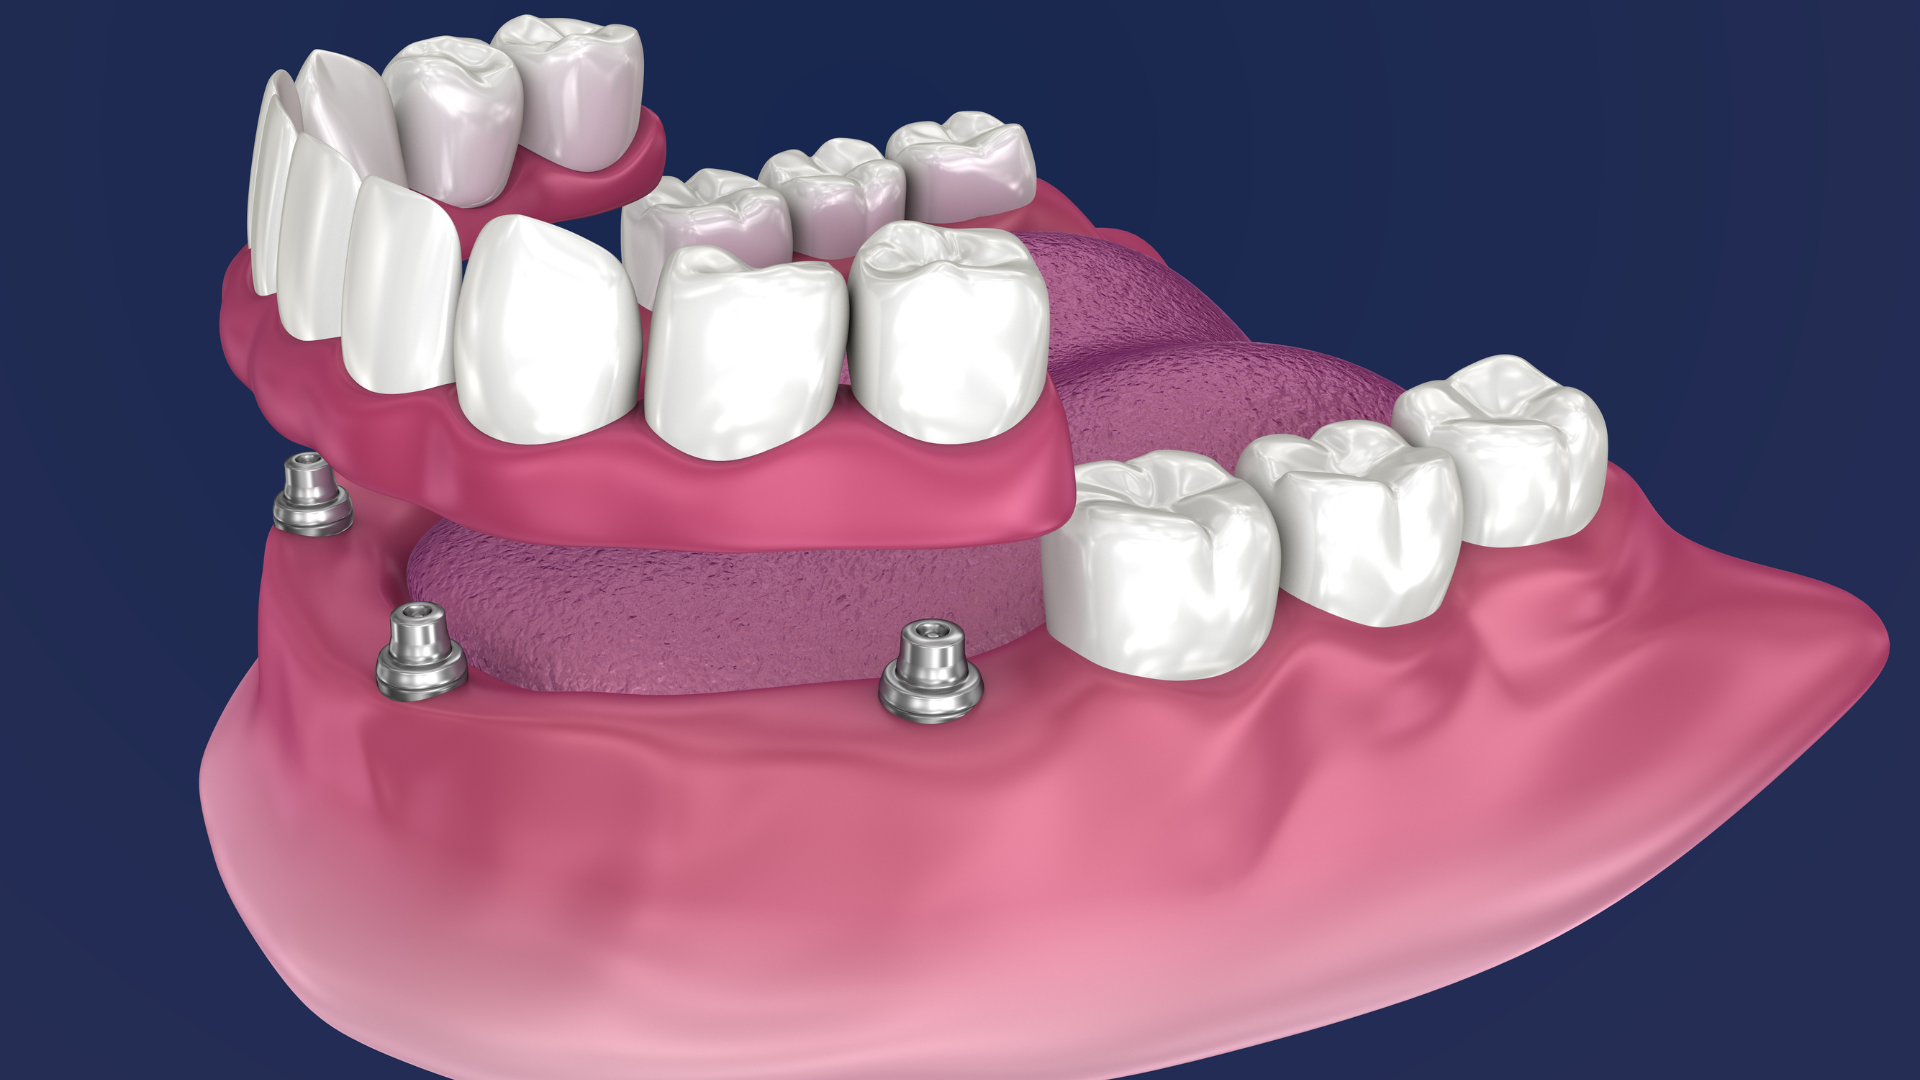 a computer generated image of a All on 4 dental implnats with a blue background .